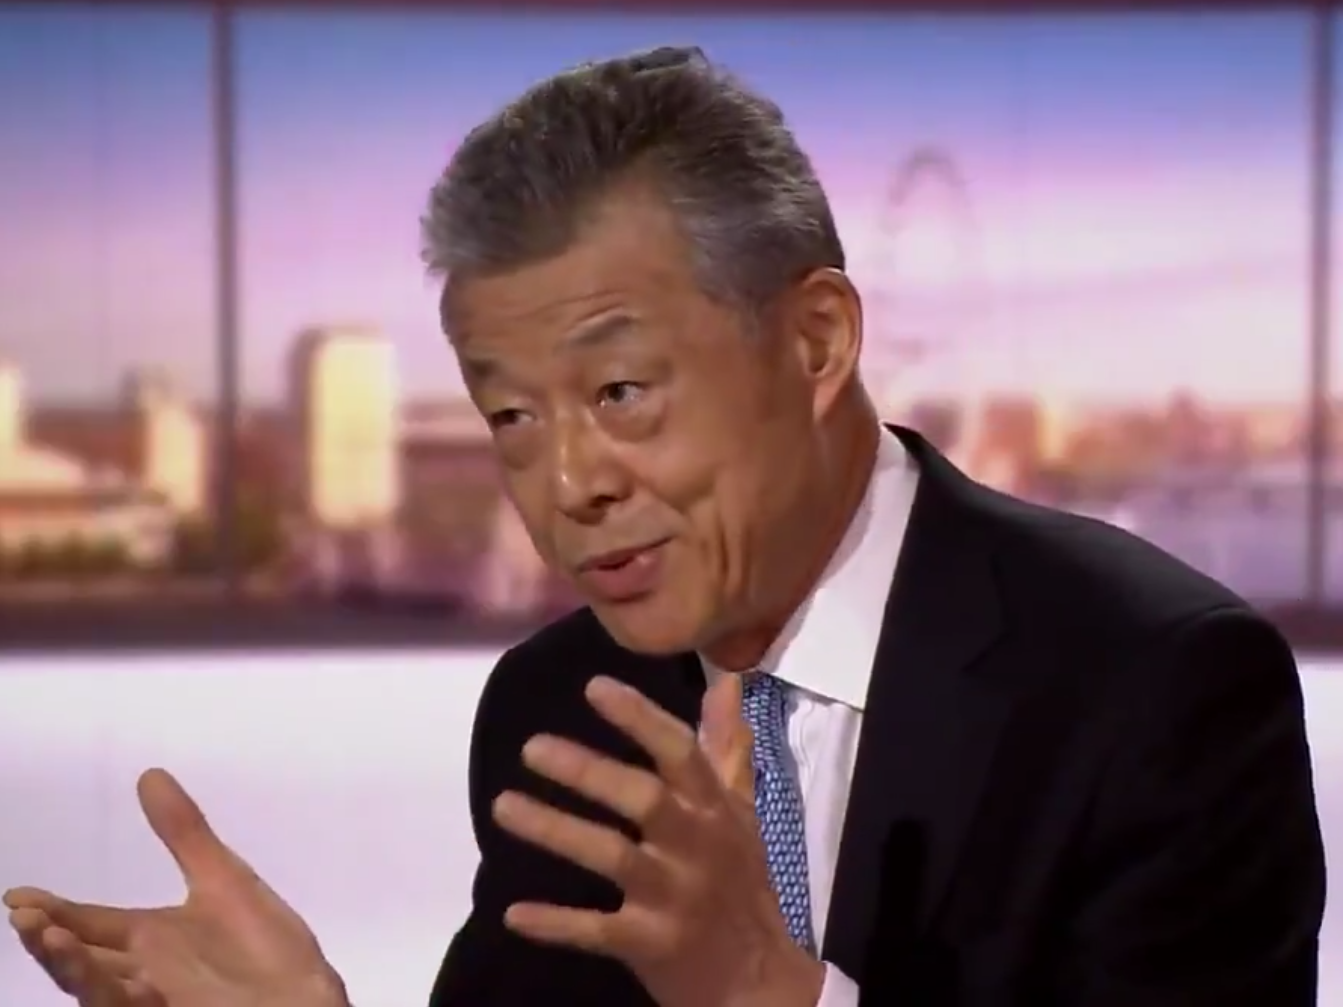 China's ambassador to the UK, Liu Xiaoming, appears on 'The Andrew Marr Show' on 19 July 2020